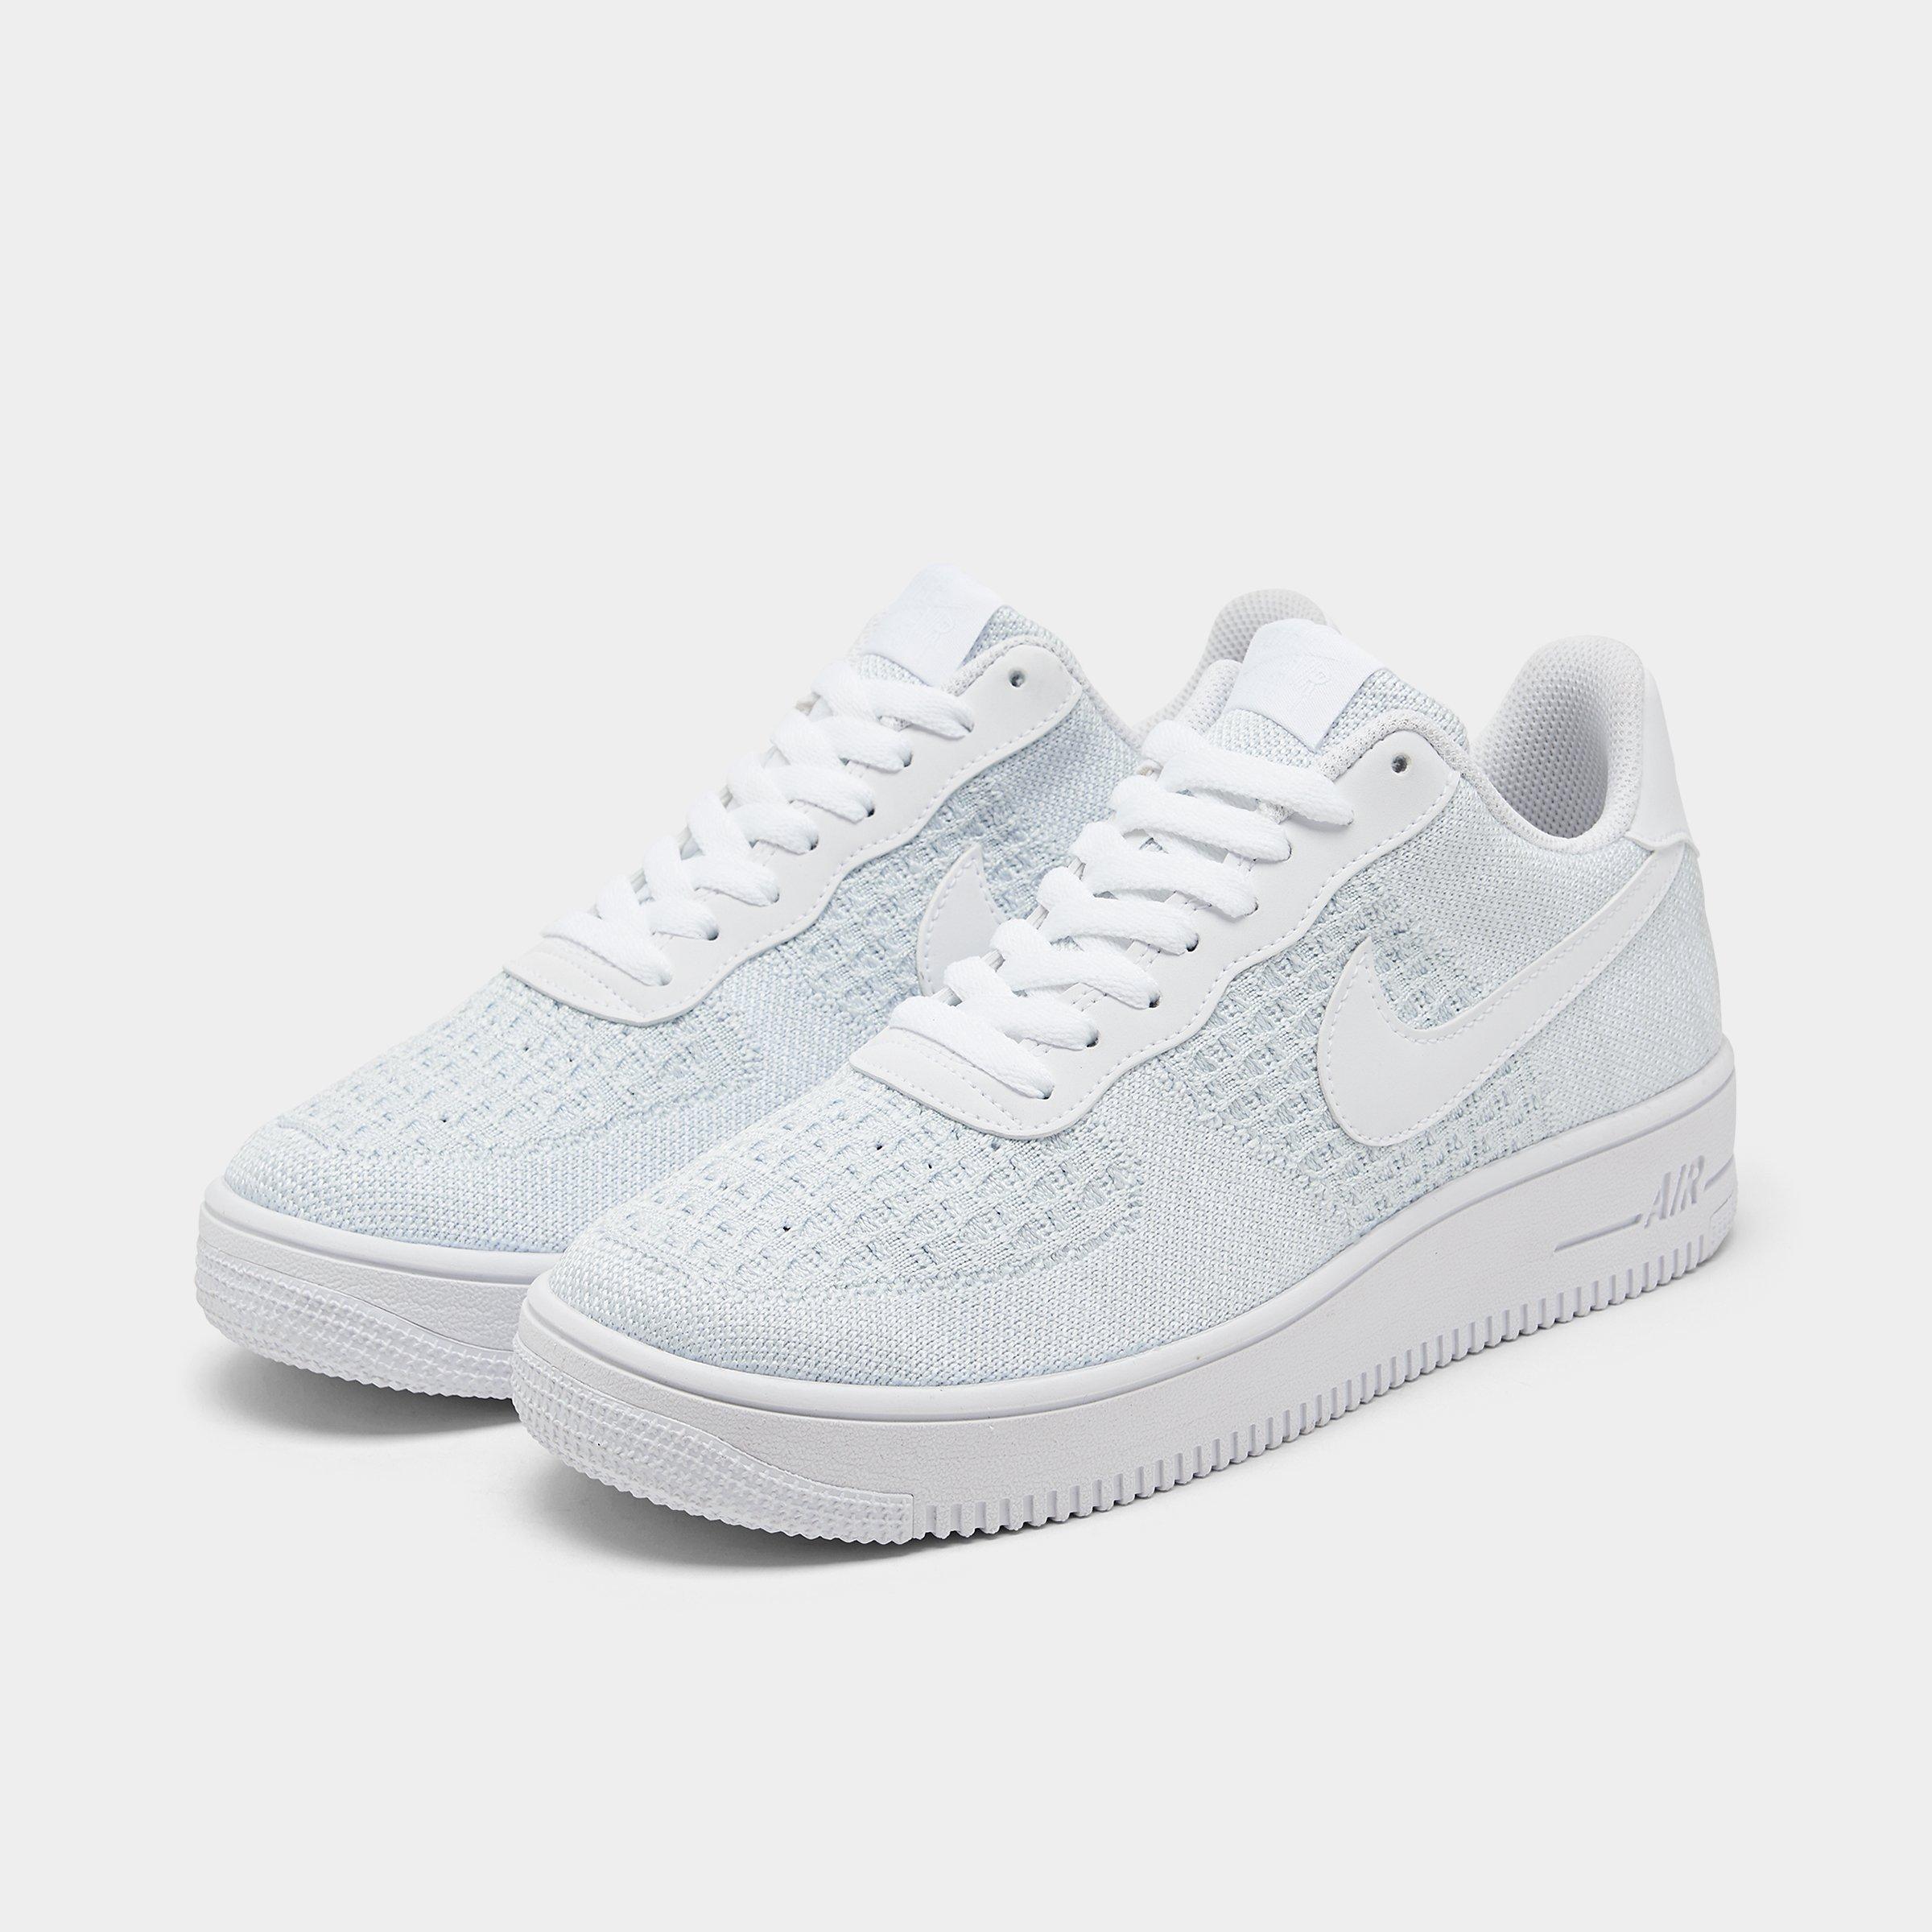 nike air force one size 3